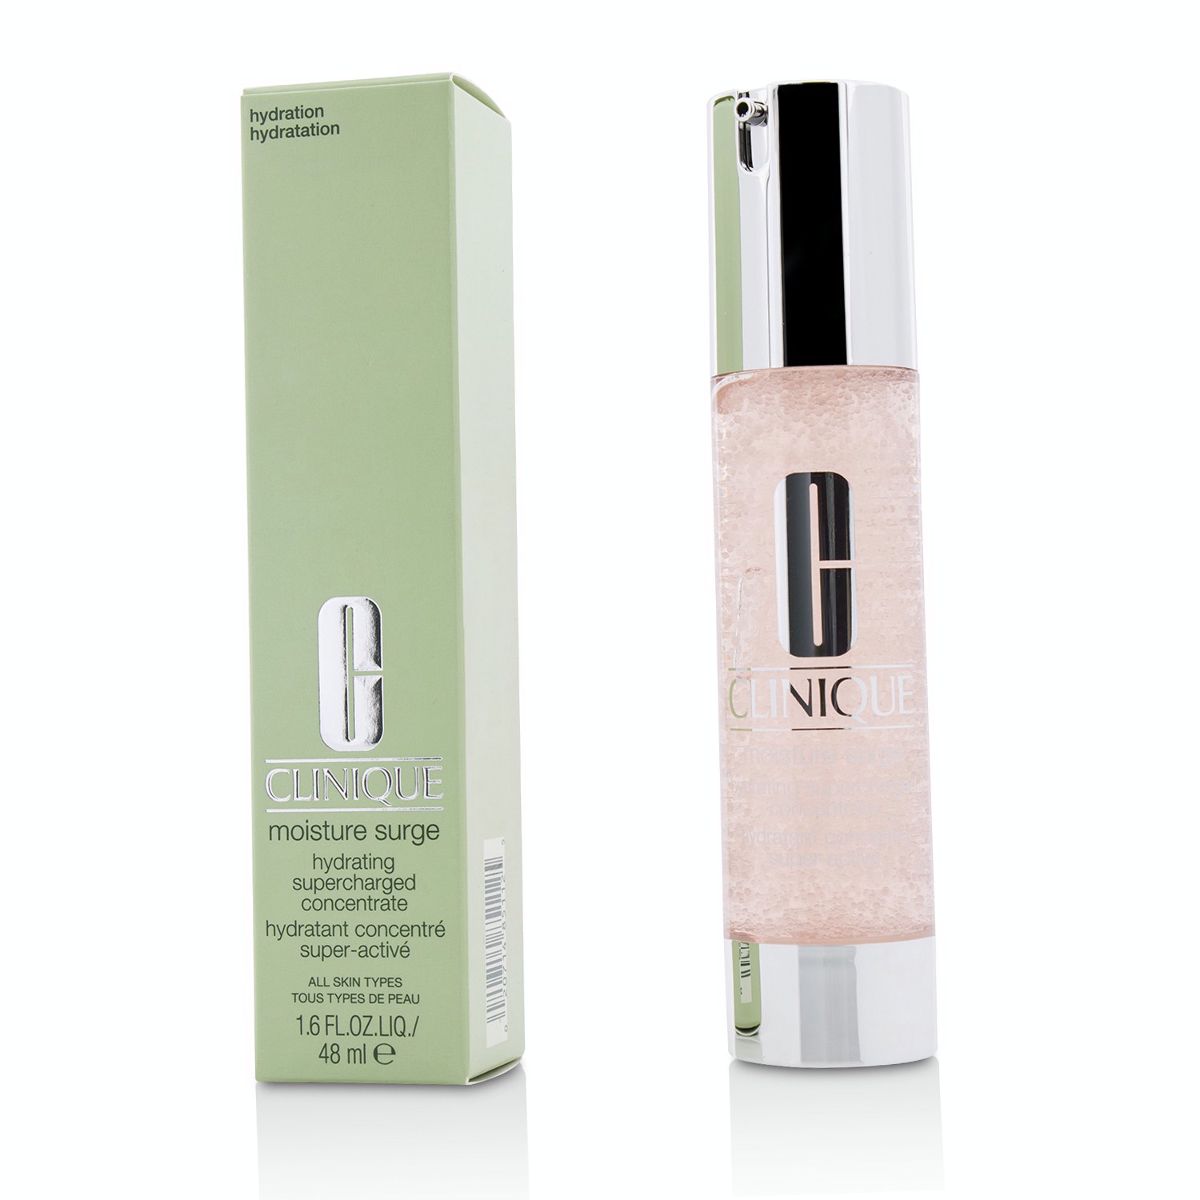 Moisture Surge Hydrating Supercharged Concentrate Clinique Image